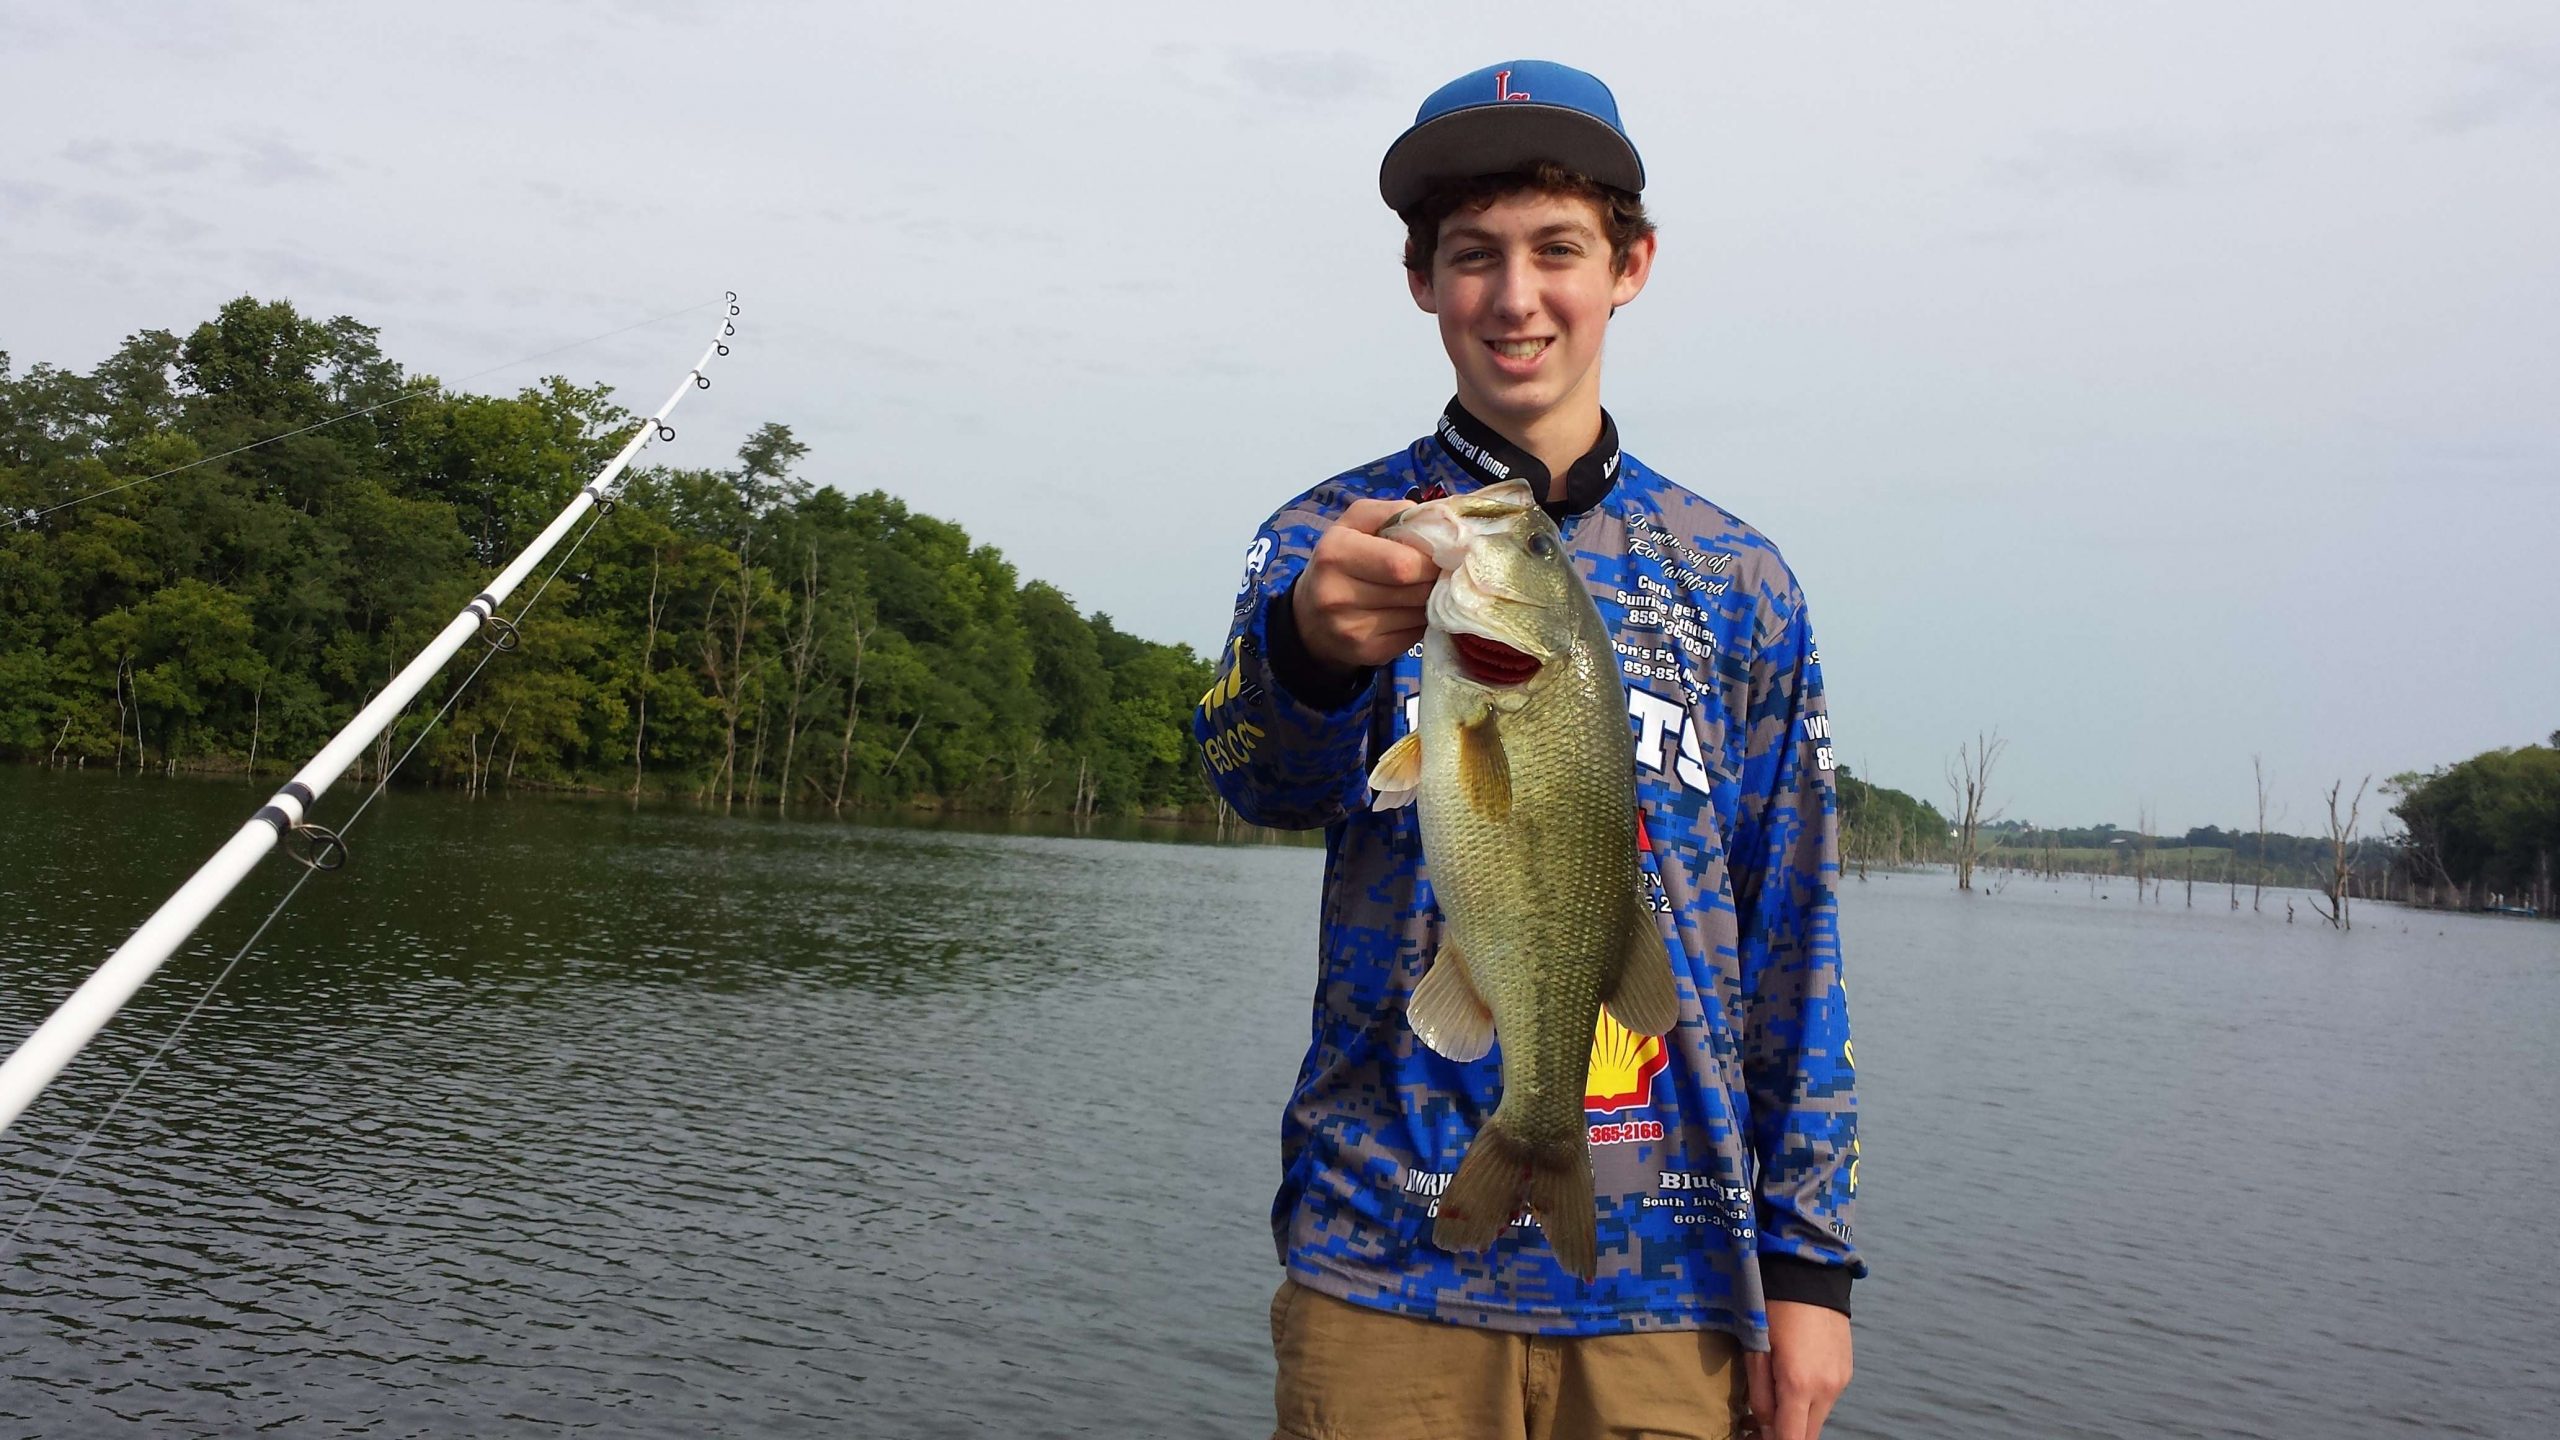 <b>Mason Moore, Waynesburg, Ky.</b><br>
Moore has been incredibly successful as a sophomore at Lincoln County High School. He fished a total of 13 tournaments in the past 12 months and placed in the Top 5 in seven of those events, while winning four, including a 20-boat Madison Central High School Open. Moore maintains a 3.86 GPA and is an active volunteer for the Ephraim McDowell Pediatric Therapy Center, where he is teamed with a special-needs buddy for fun activities.